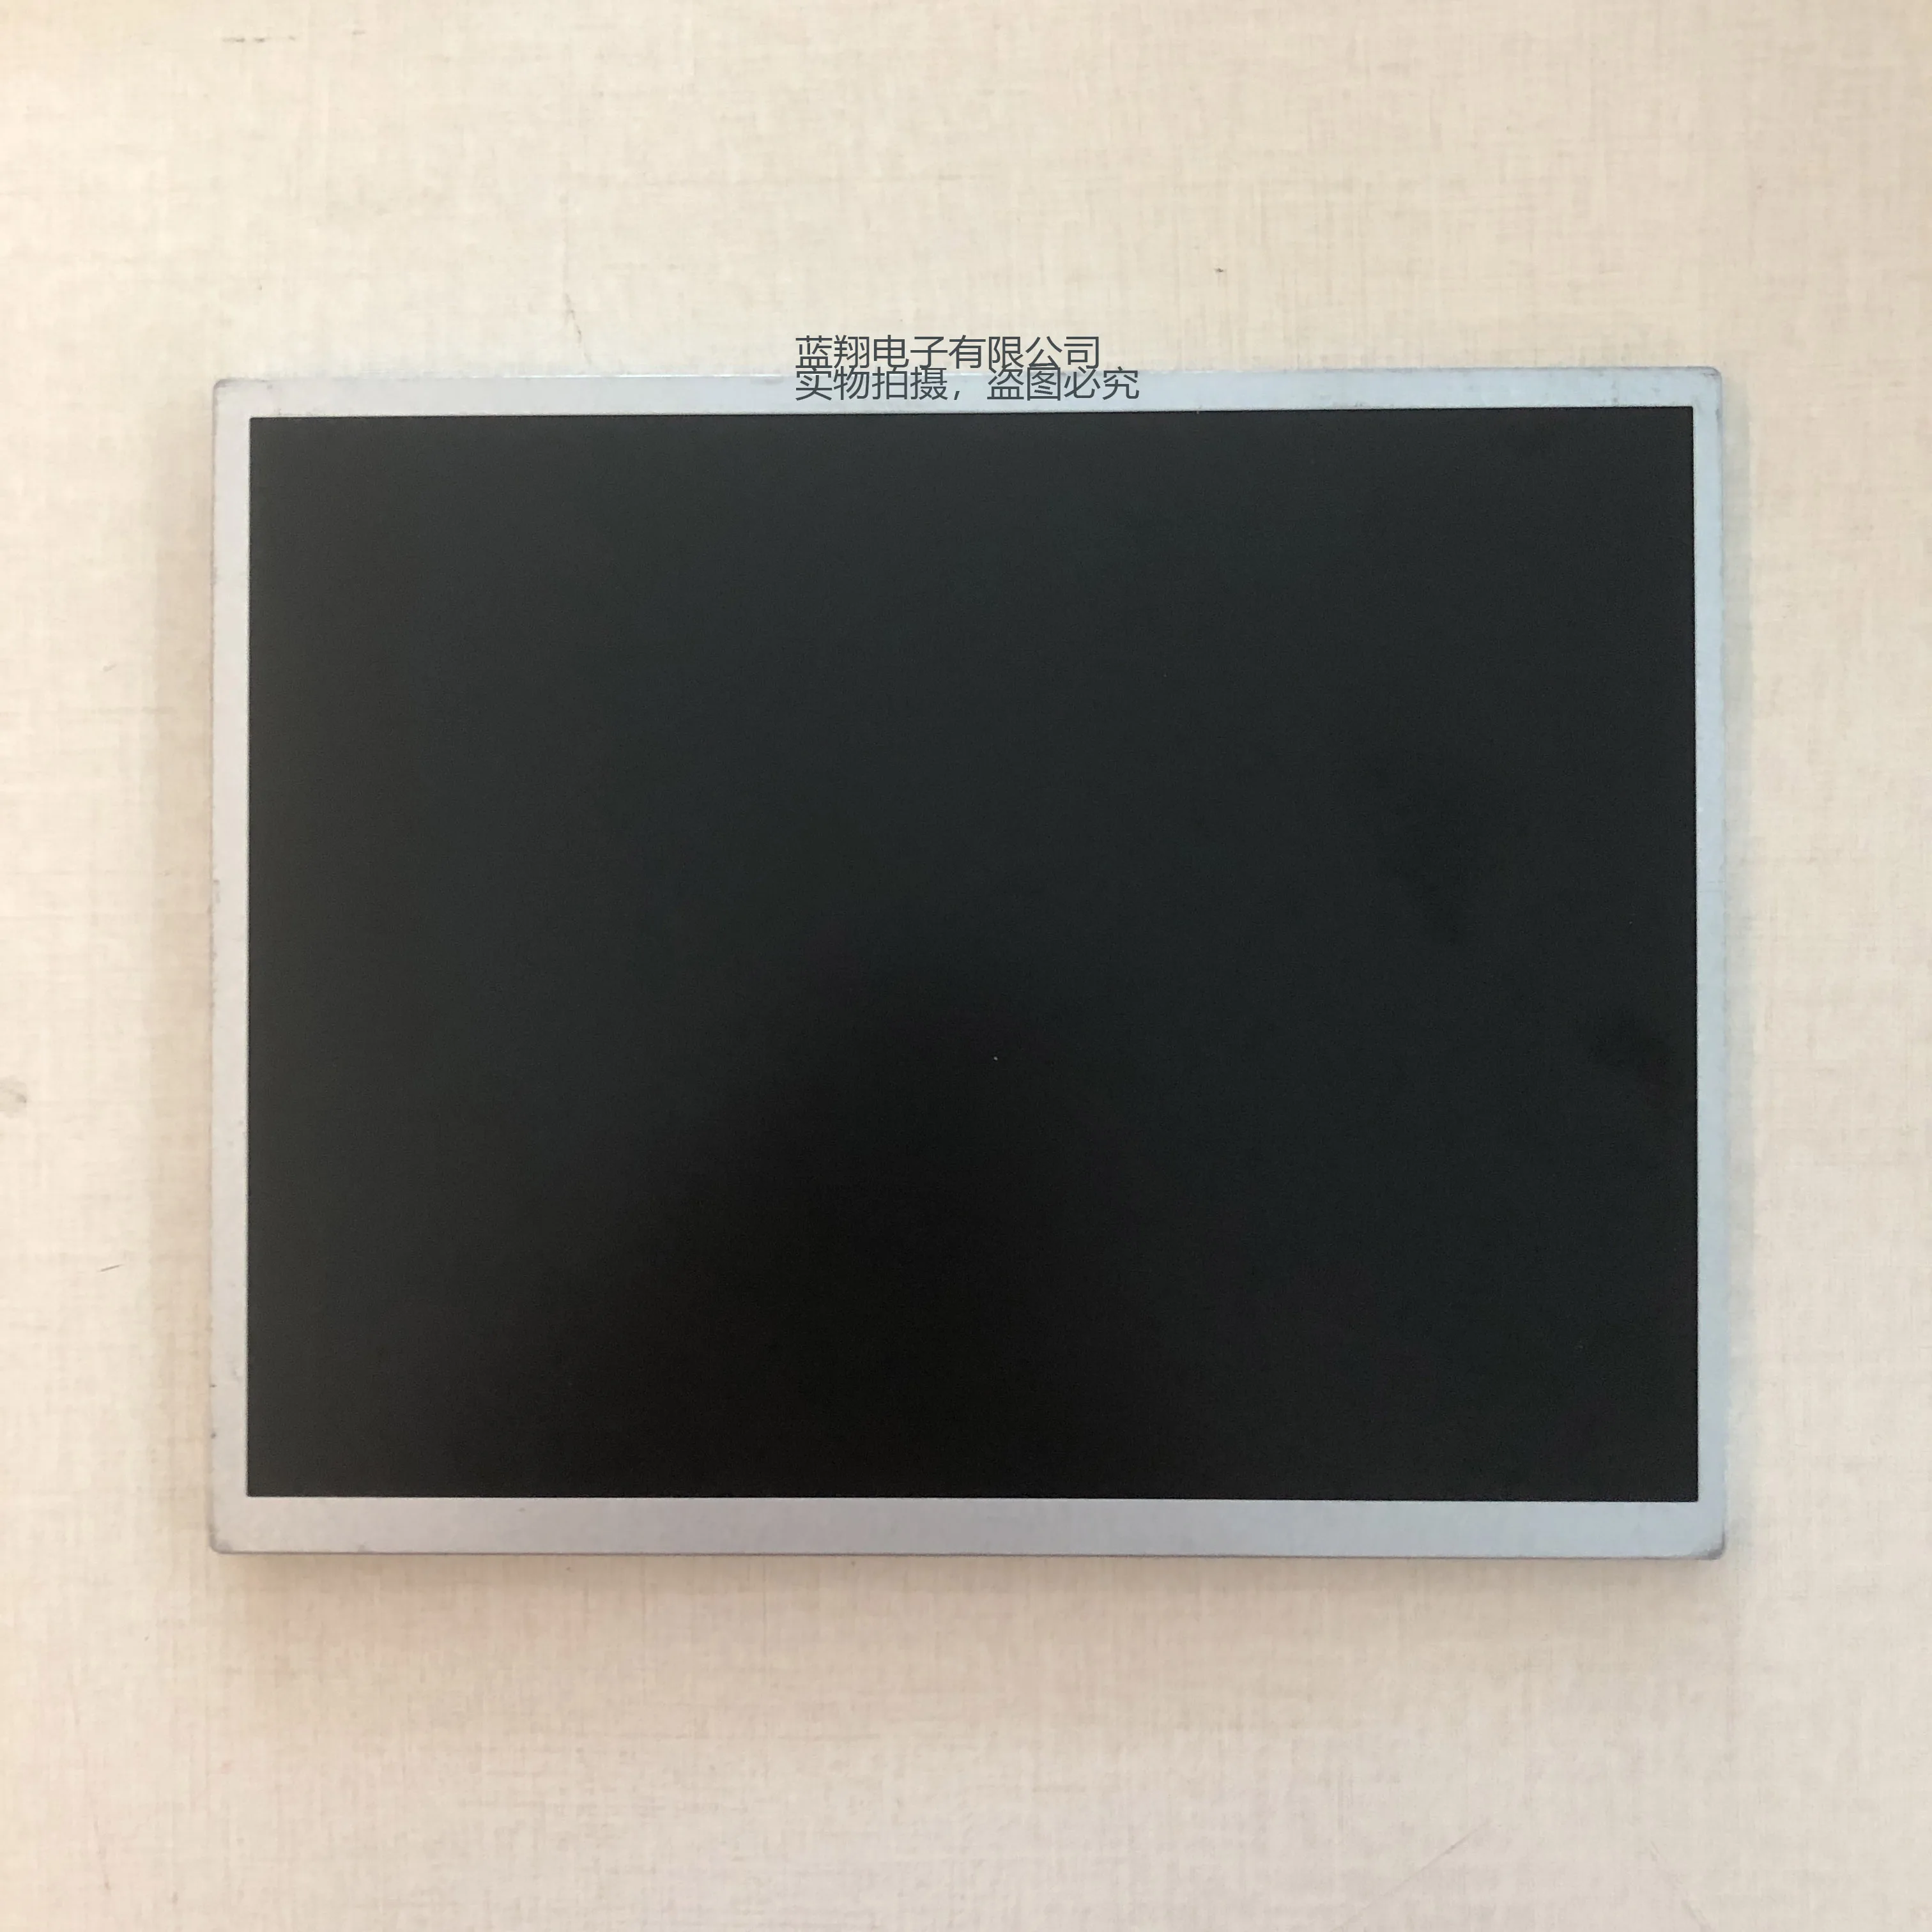 

For Chimei 10.4inch G104V1-T03 640*480 LCD Screen Display Panel TFT Repair Industrial Computer